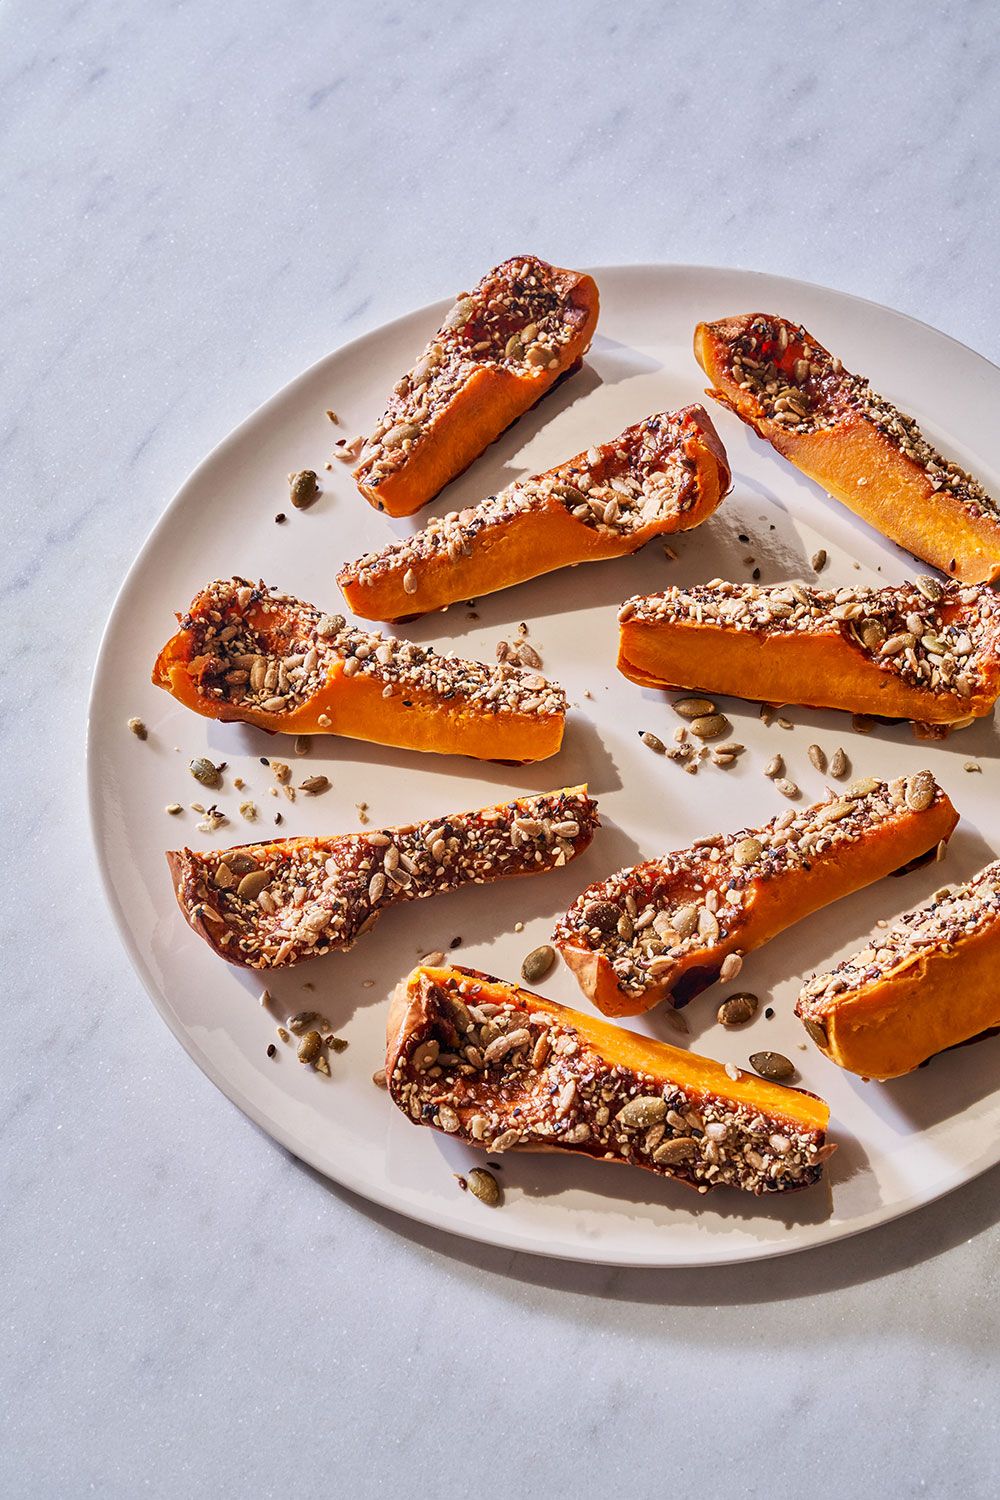 Roasted Honeypatch Squash with Miso Crumble